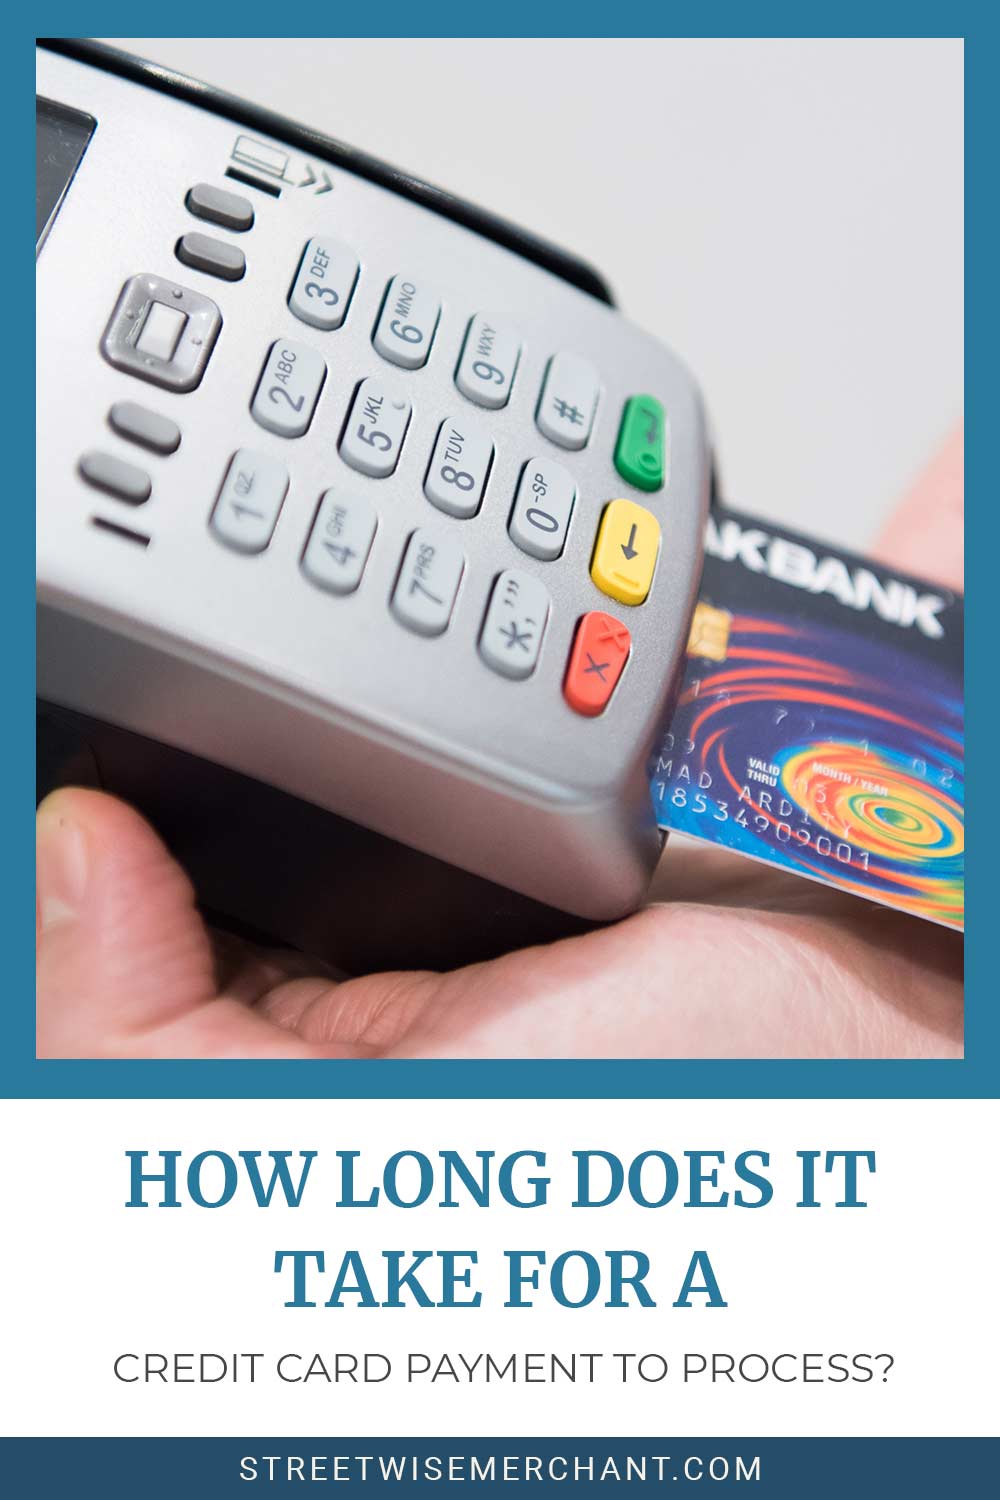 Person insert a credit card into a machine - How Long Does It Take for a Credit Card Payment to Process.